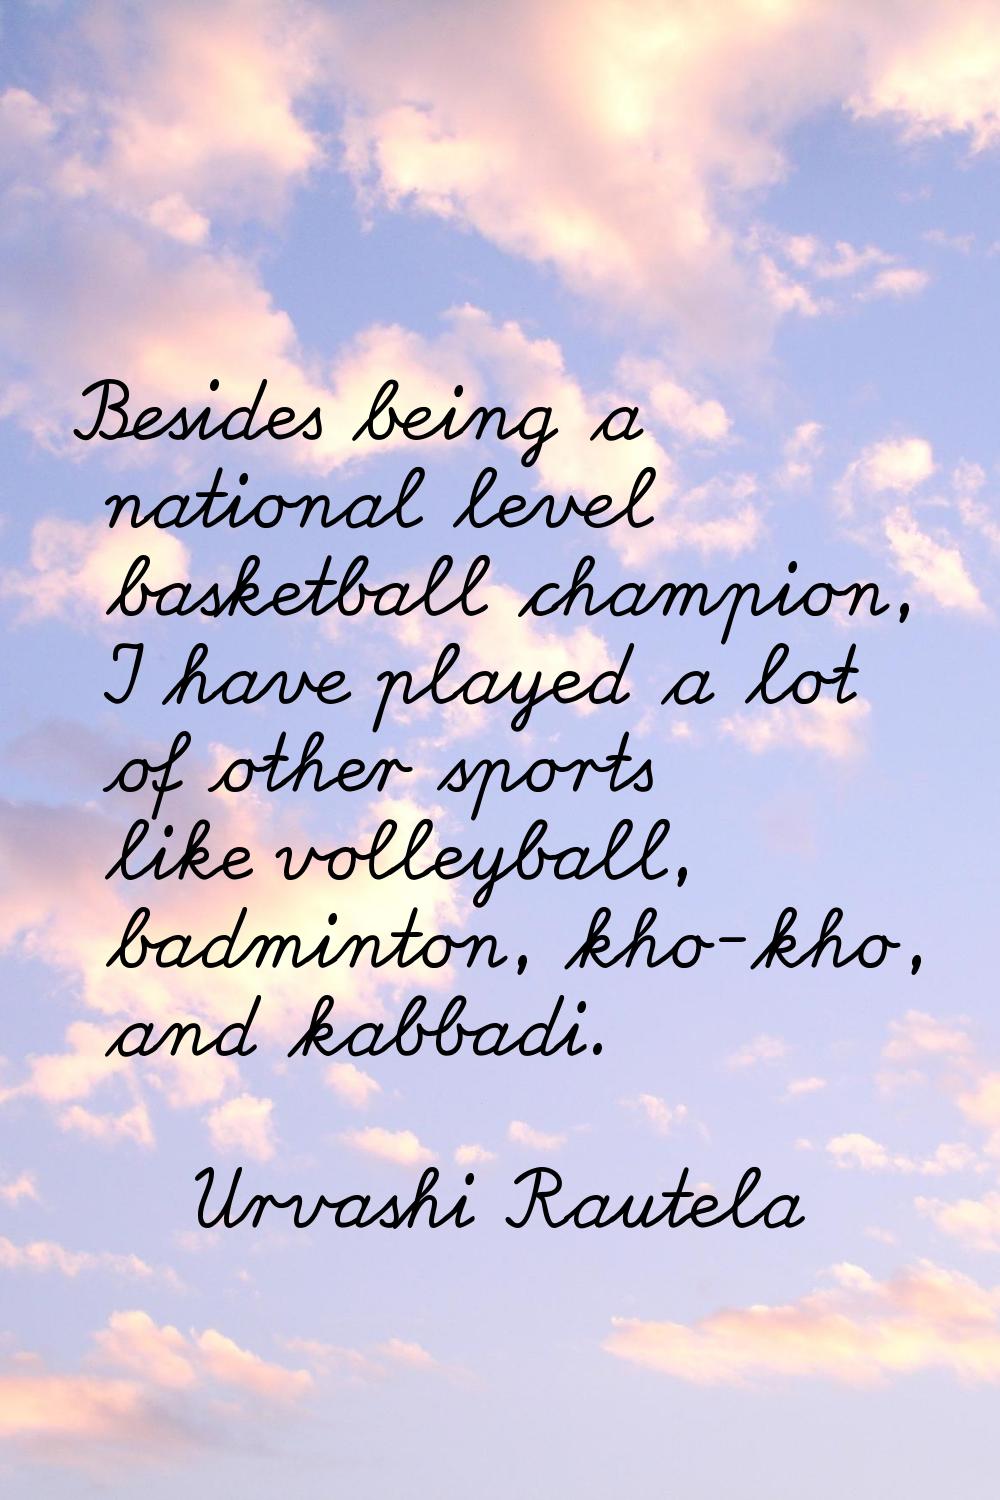 Besides being a national level basketball champion, I have played a lot of other sports like volley